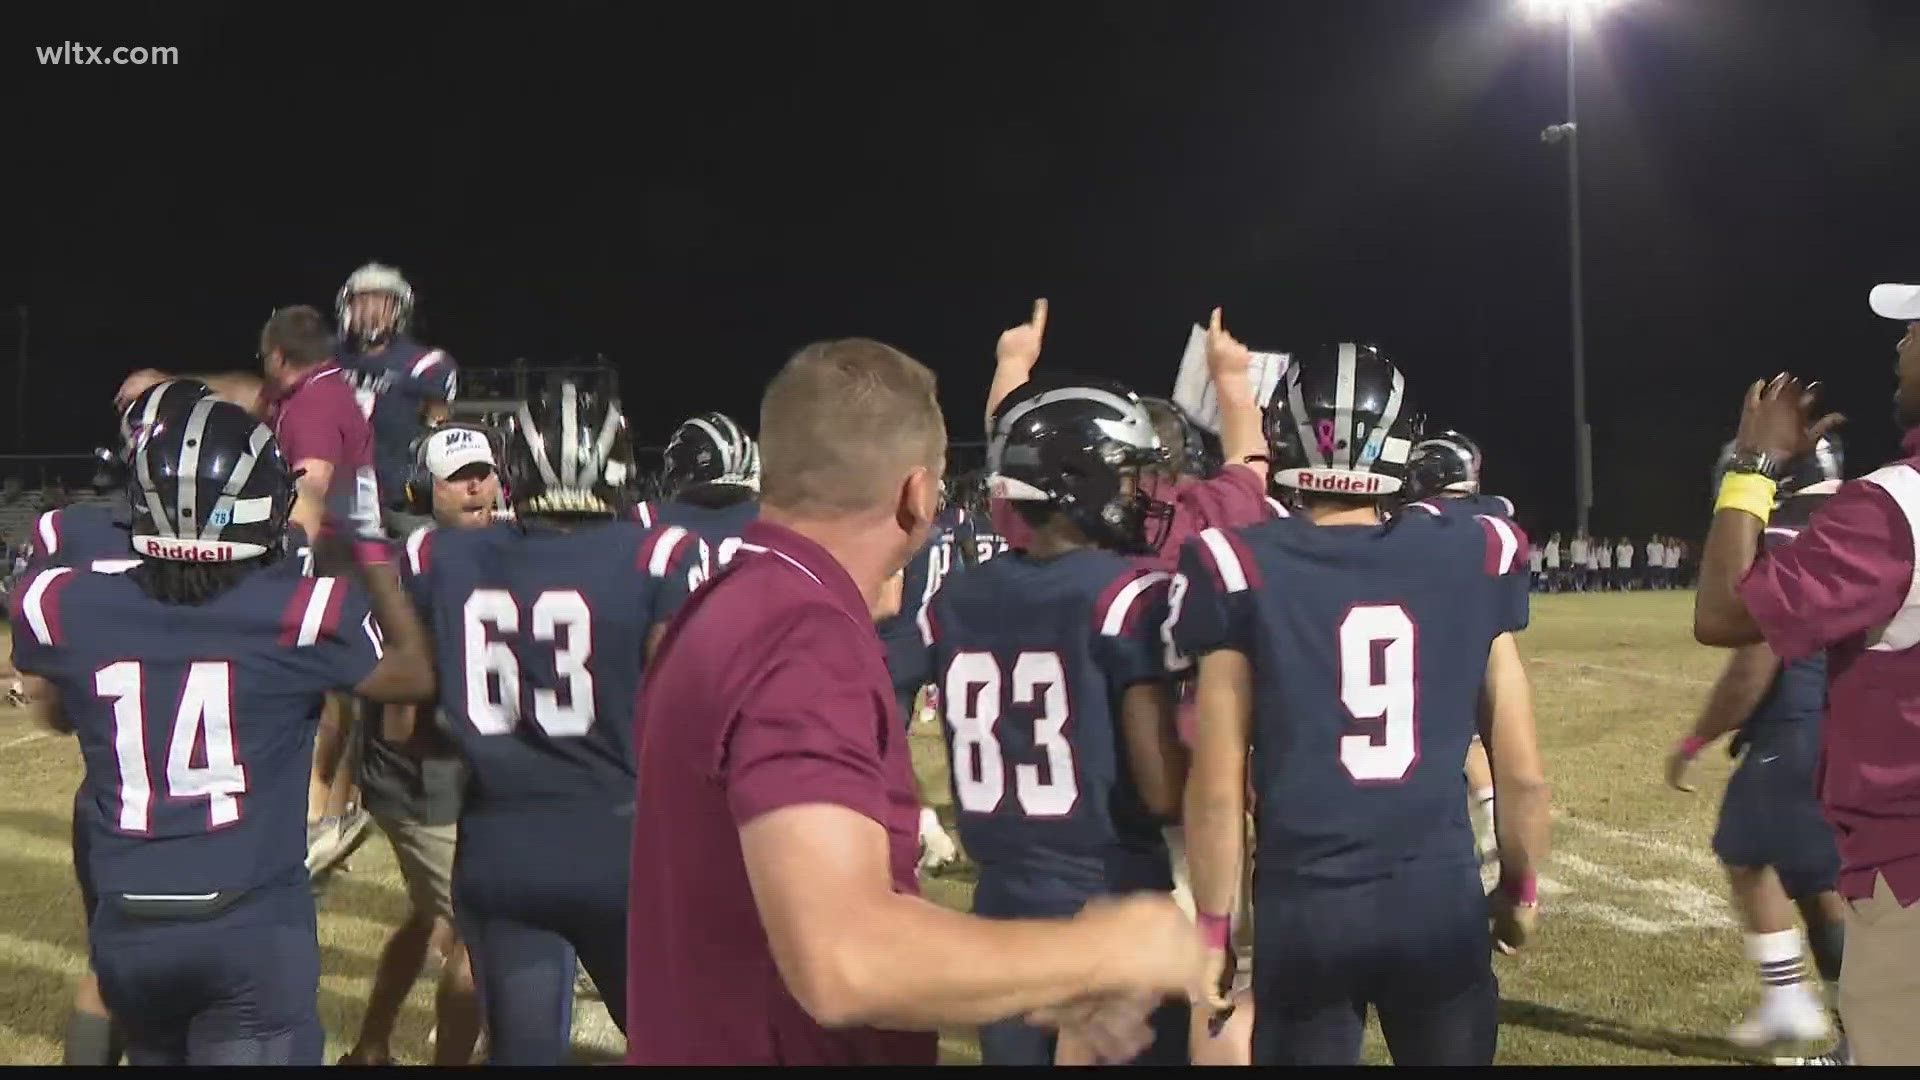 Highlights from Thursday night high school football with games at White Knoll, Lexington and Cardinal Newman.